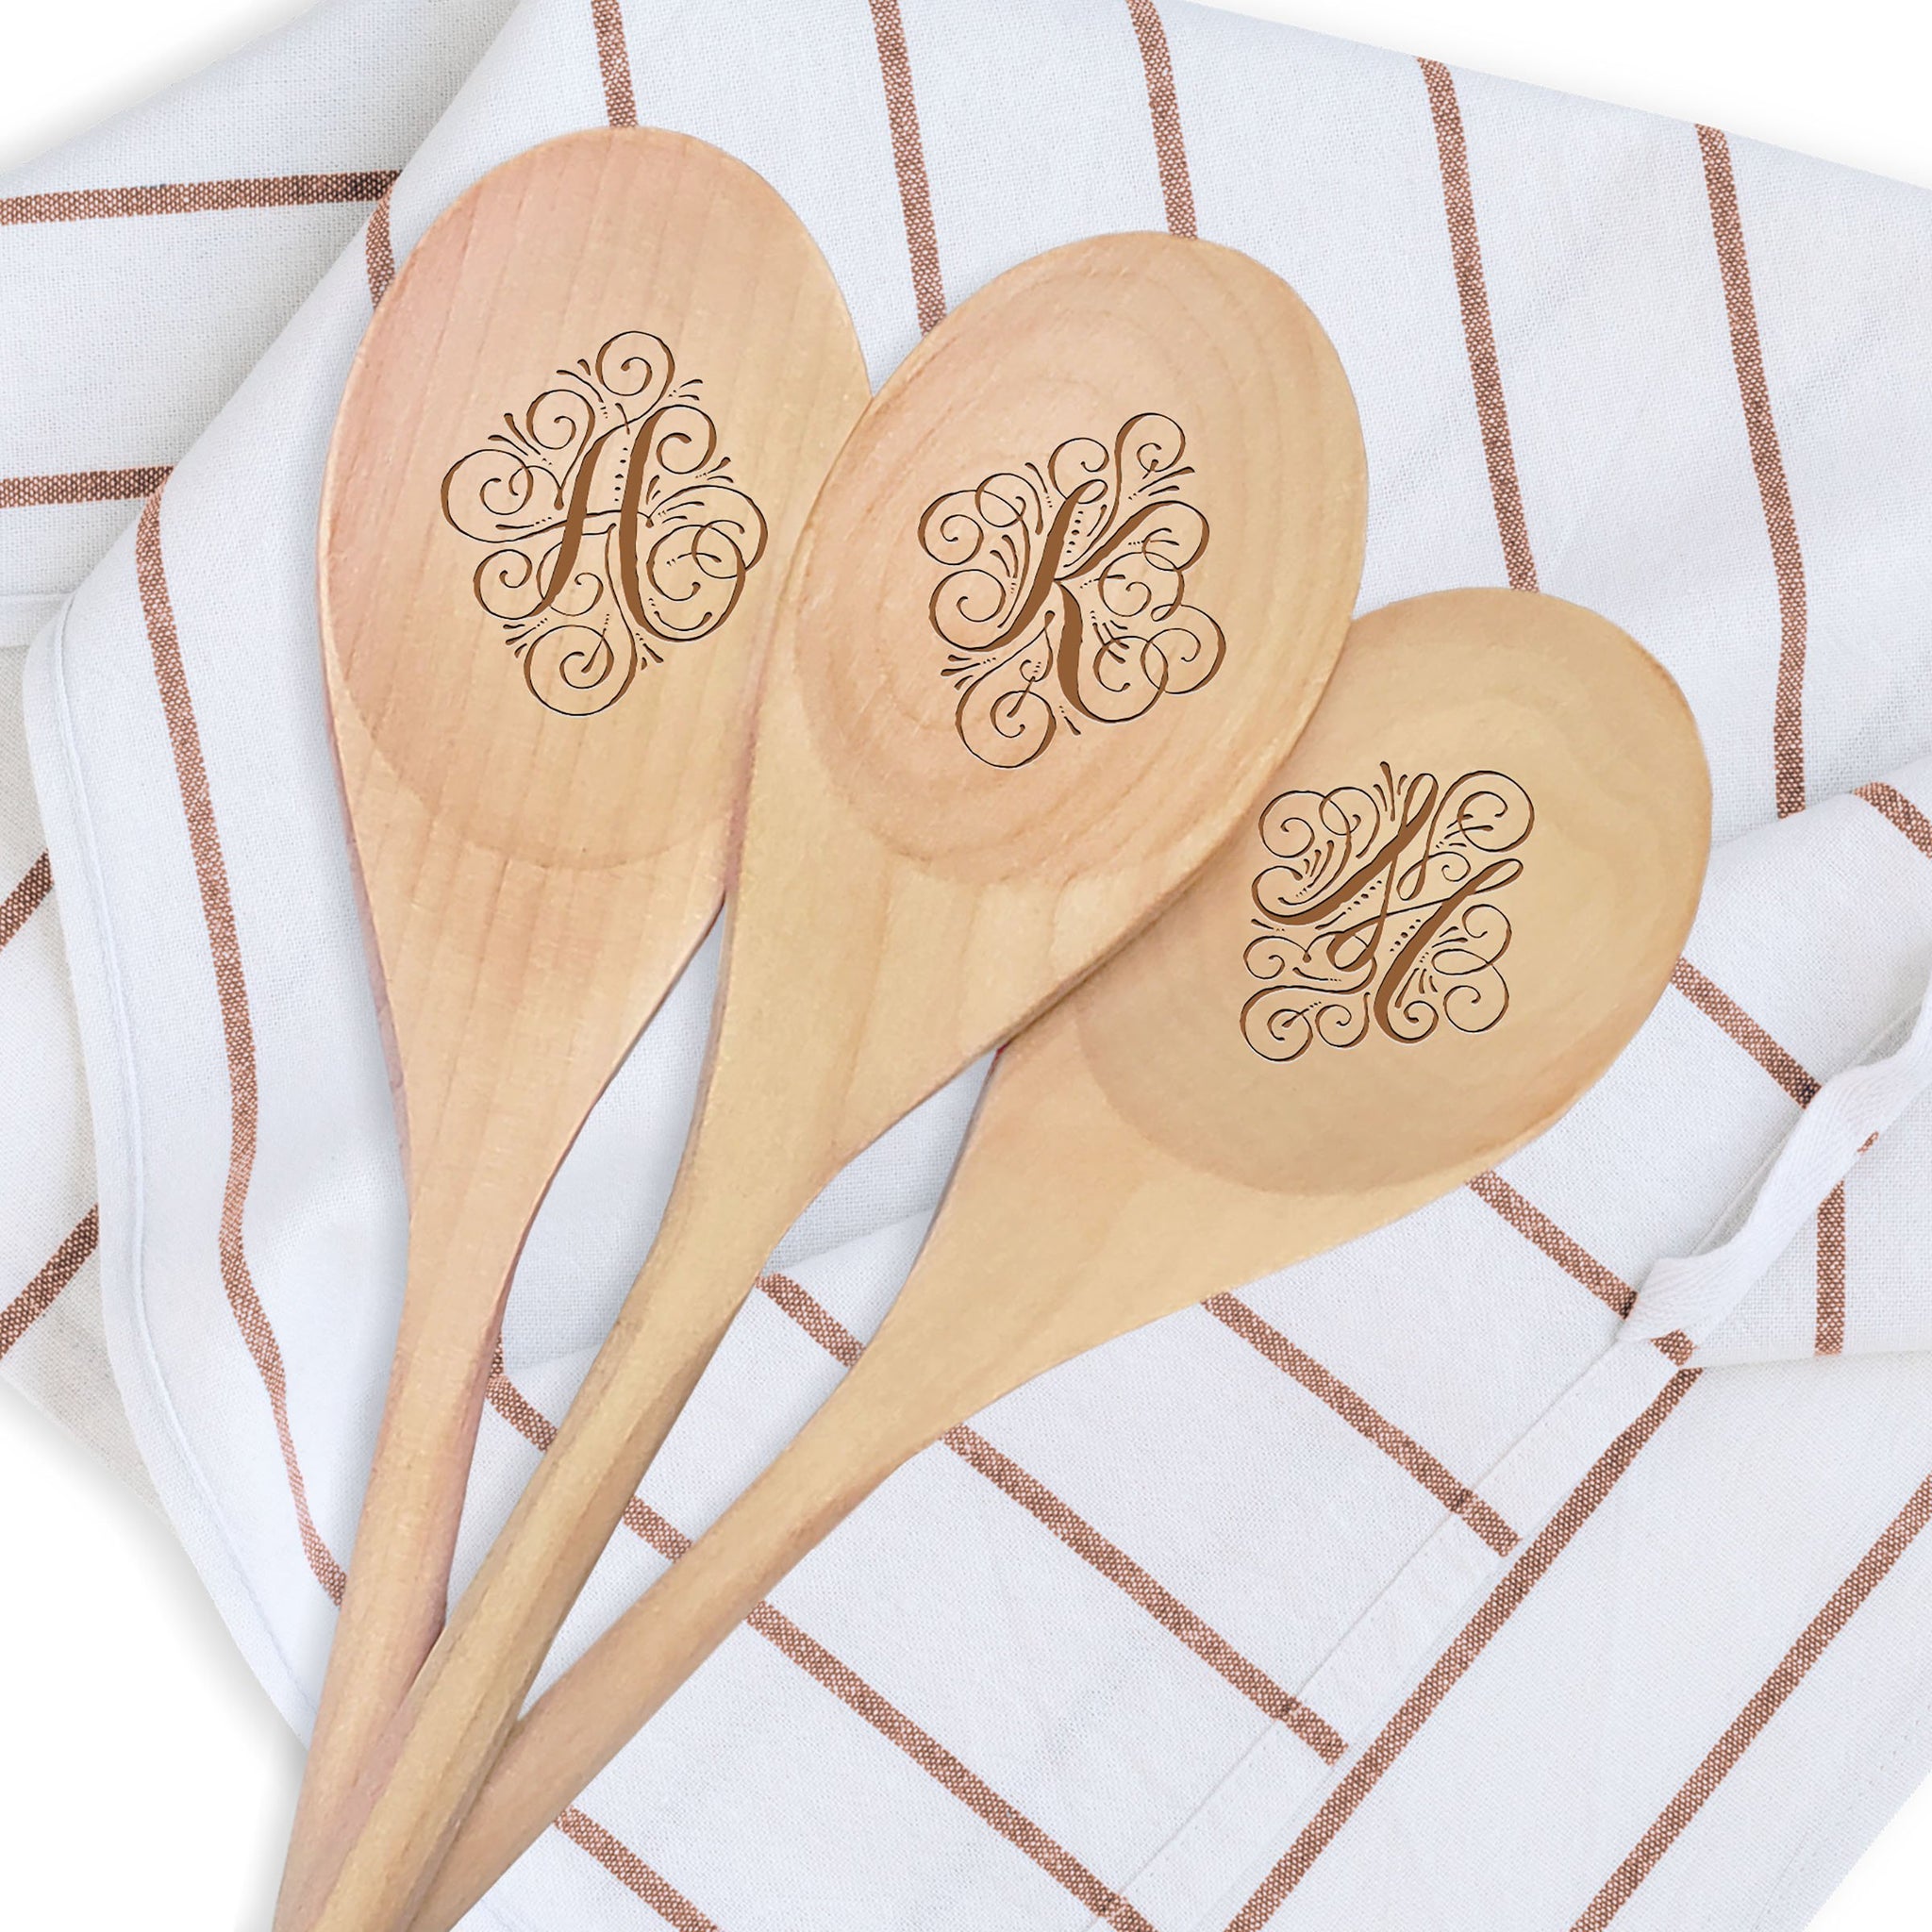 Set of 2 Wooden Spoons - Hand Carved Wooden Spoon - Wooden Cooking & S